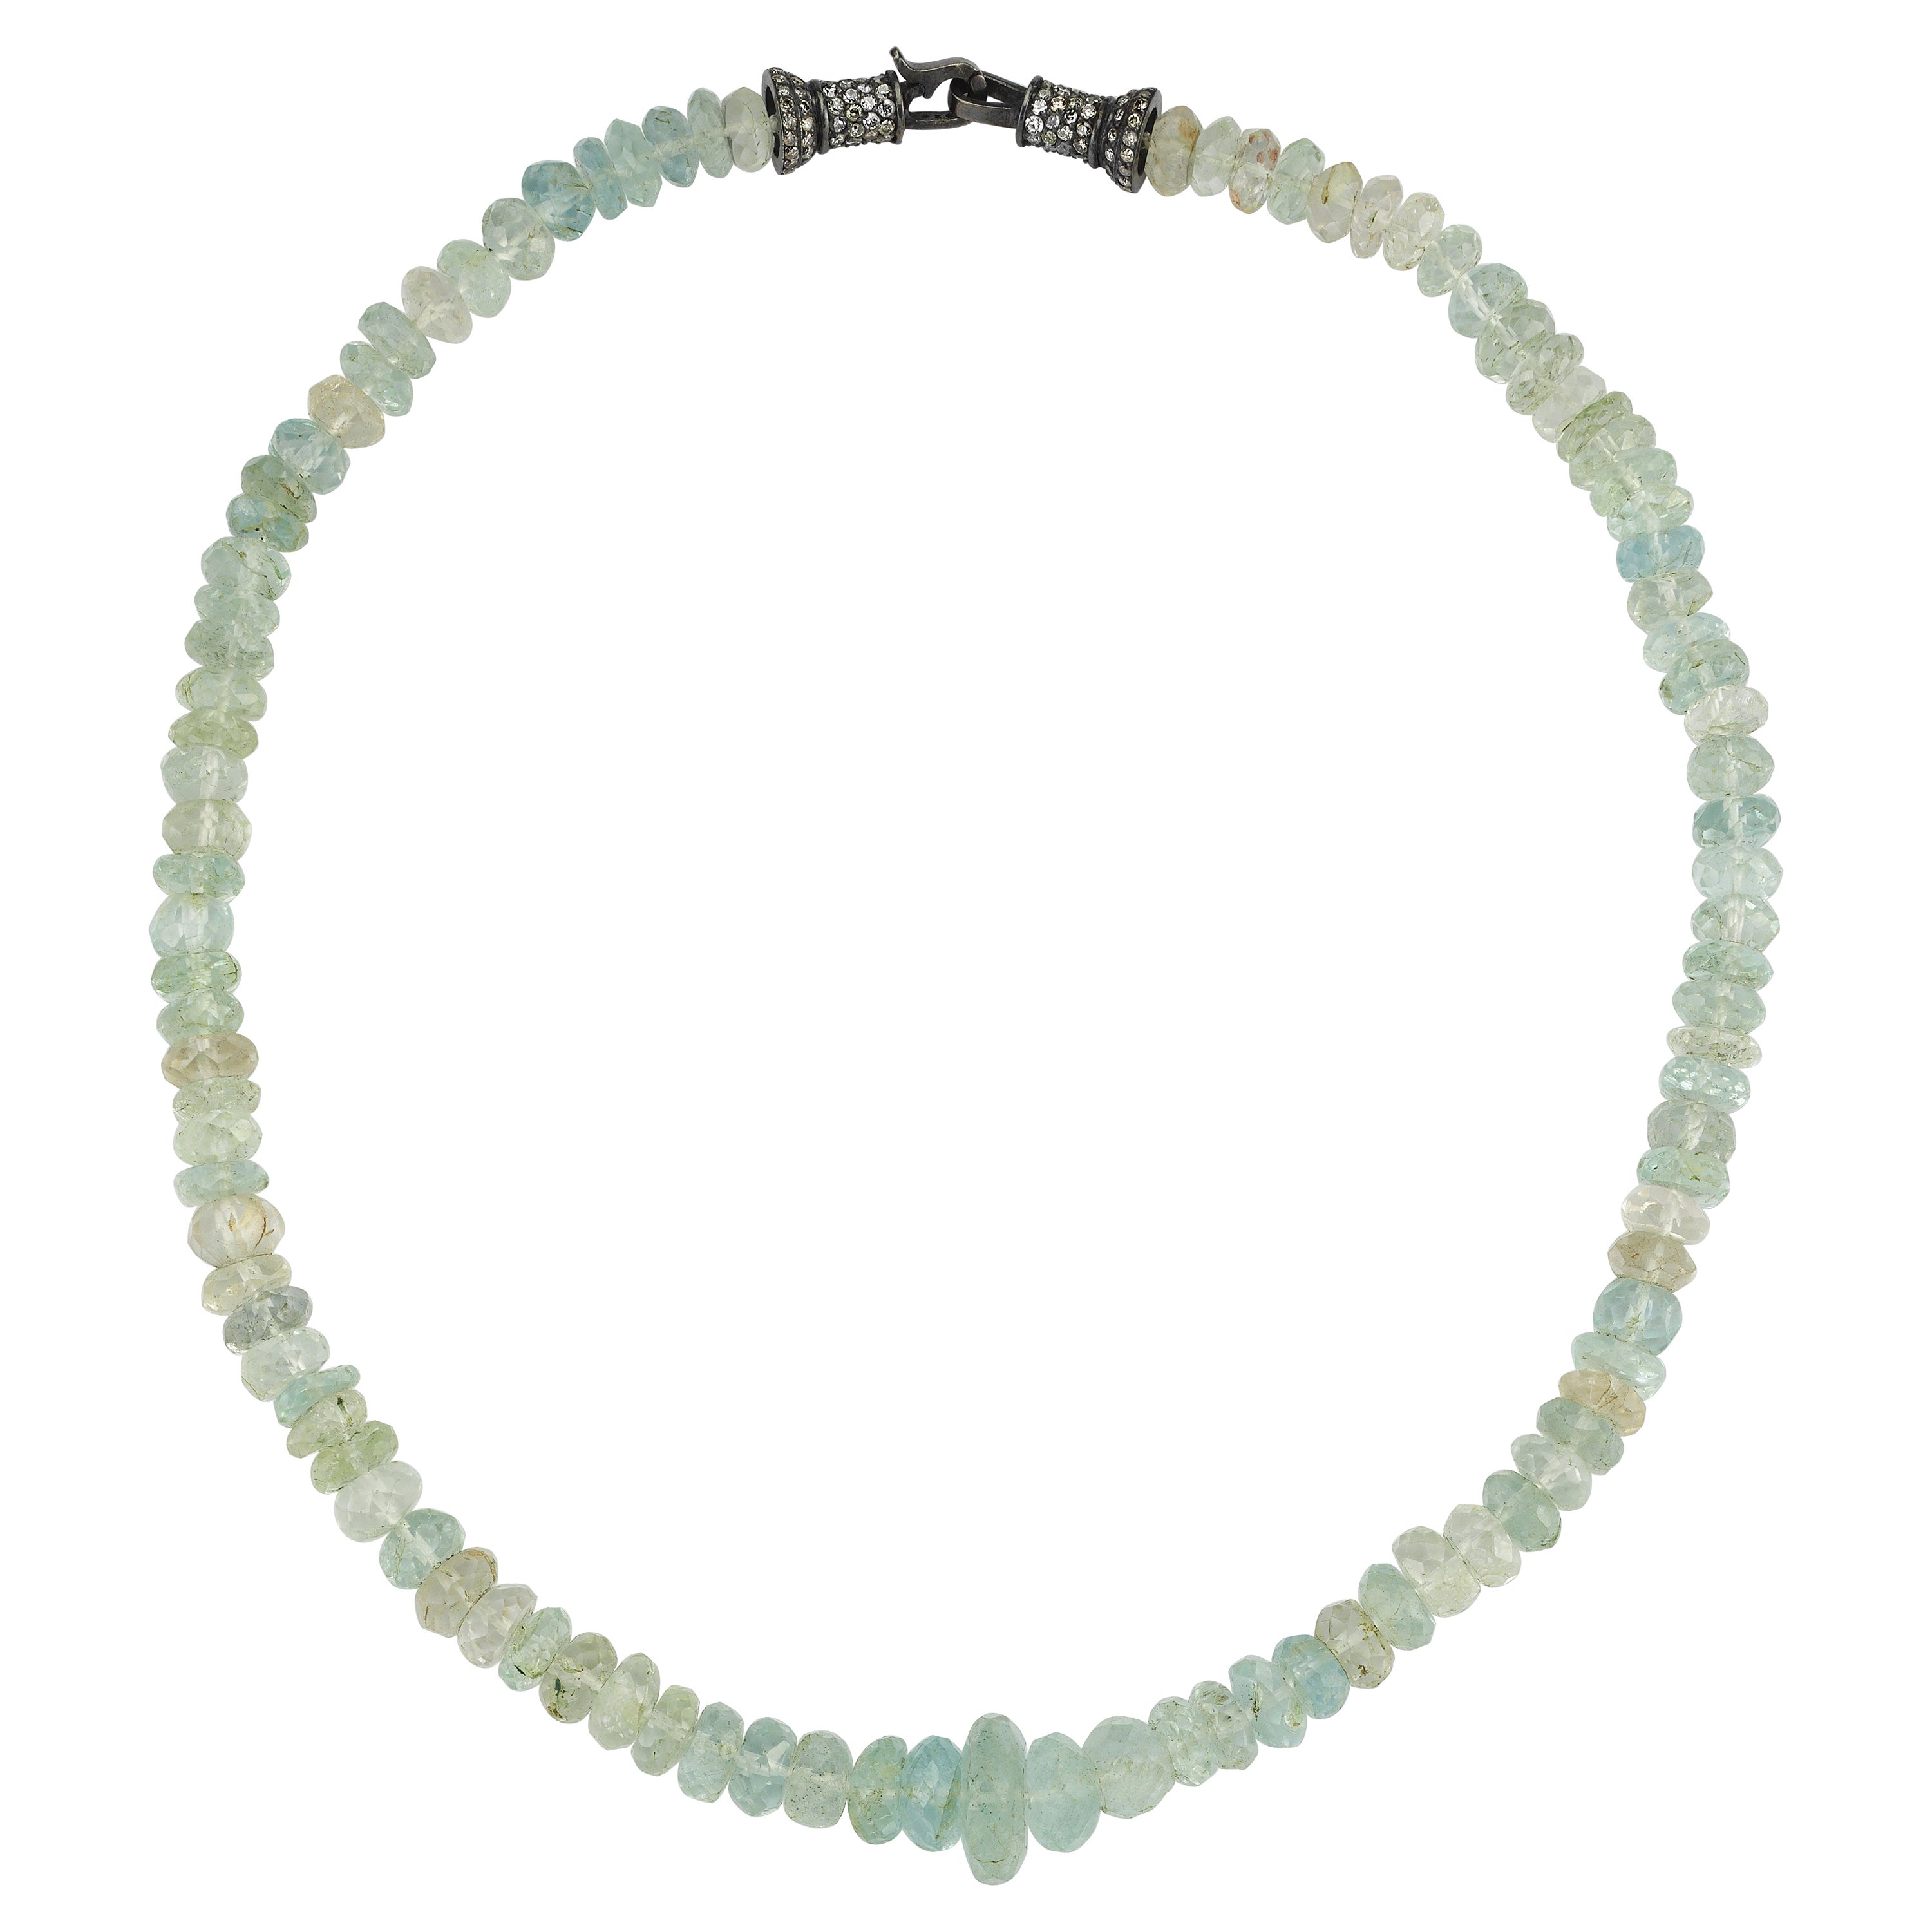 Aquamarine Beads Necklace with Pave Diamond Silver Clasp For Sale